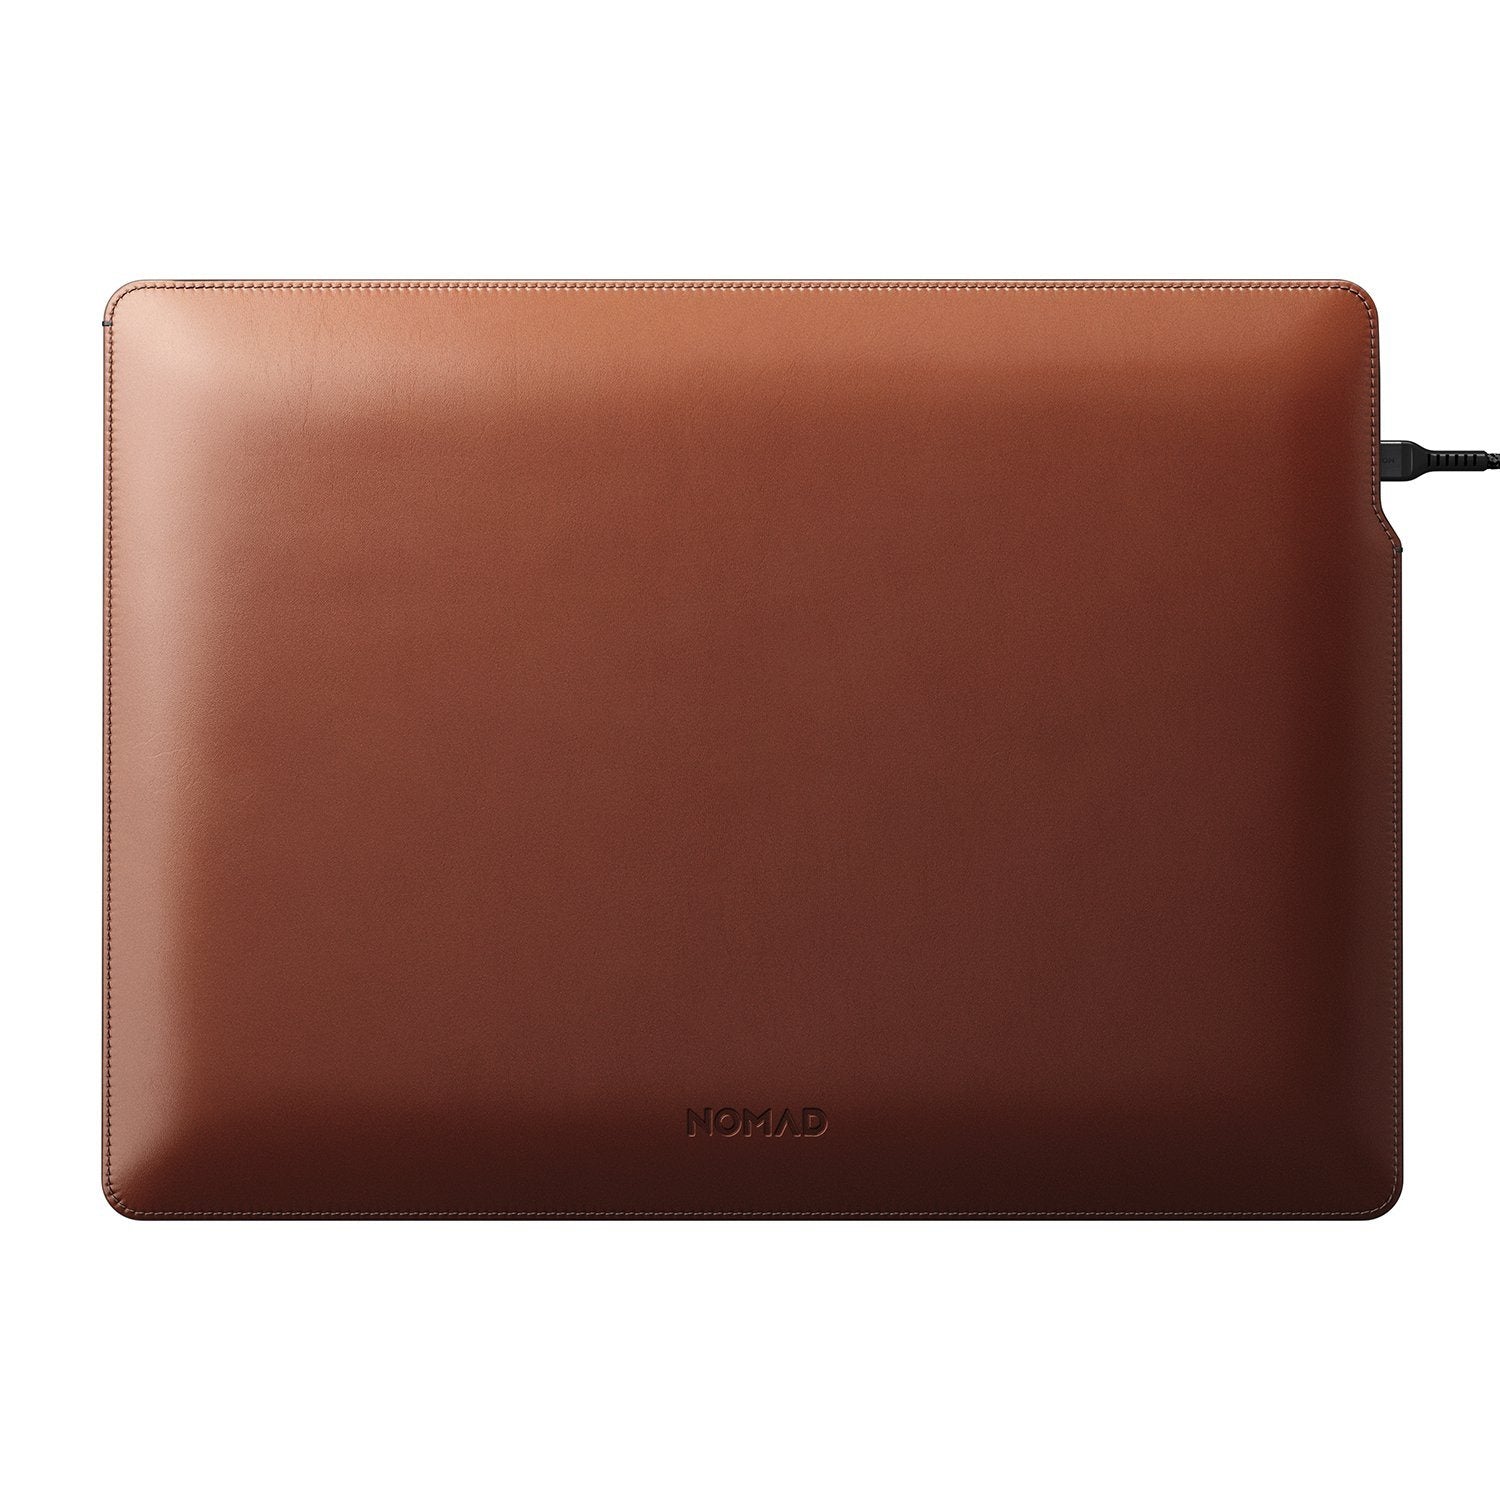 NOMAD ECCO Leather Sleeve for MacBook Pro 16", English Tan Default NOMAD 